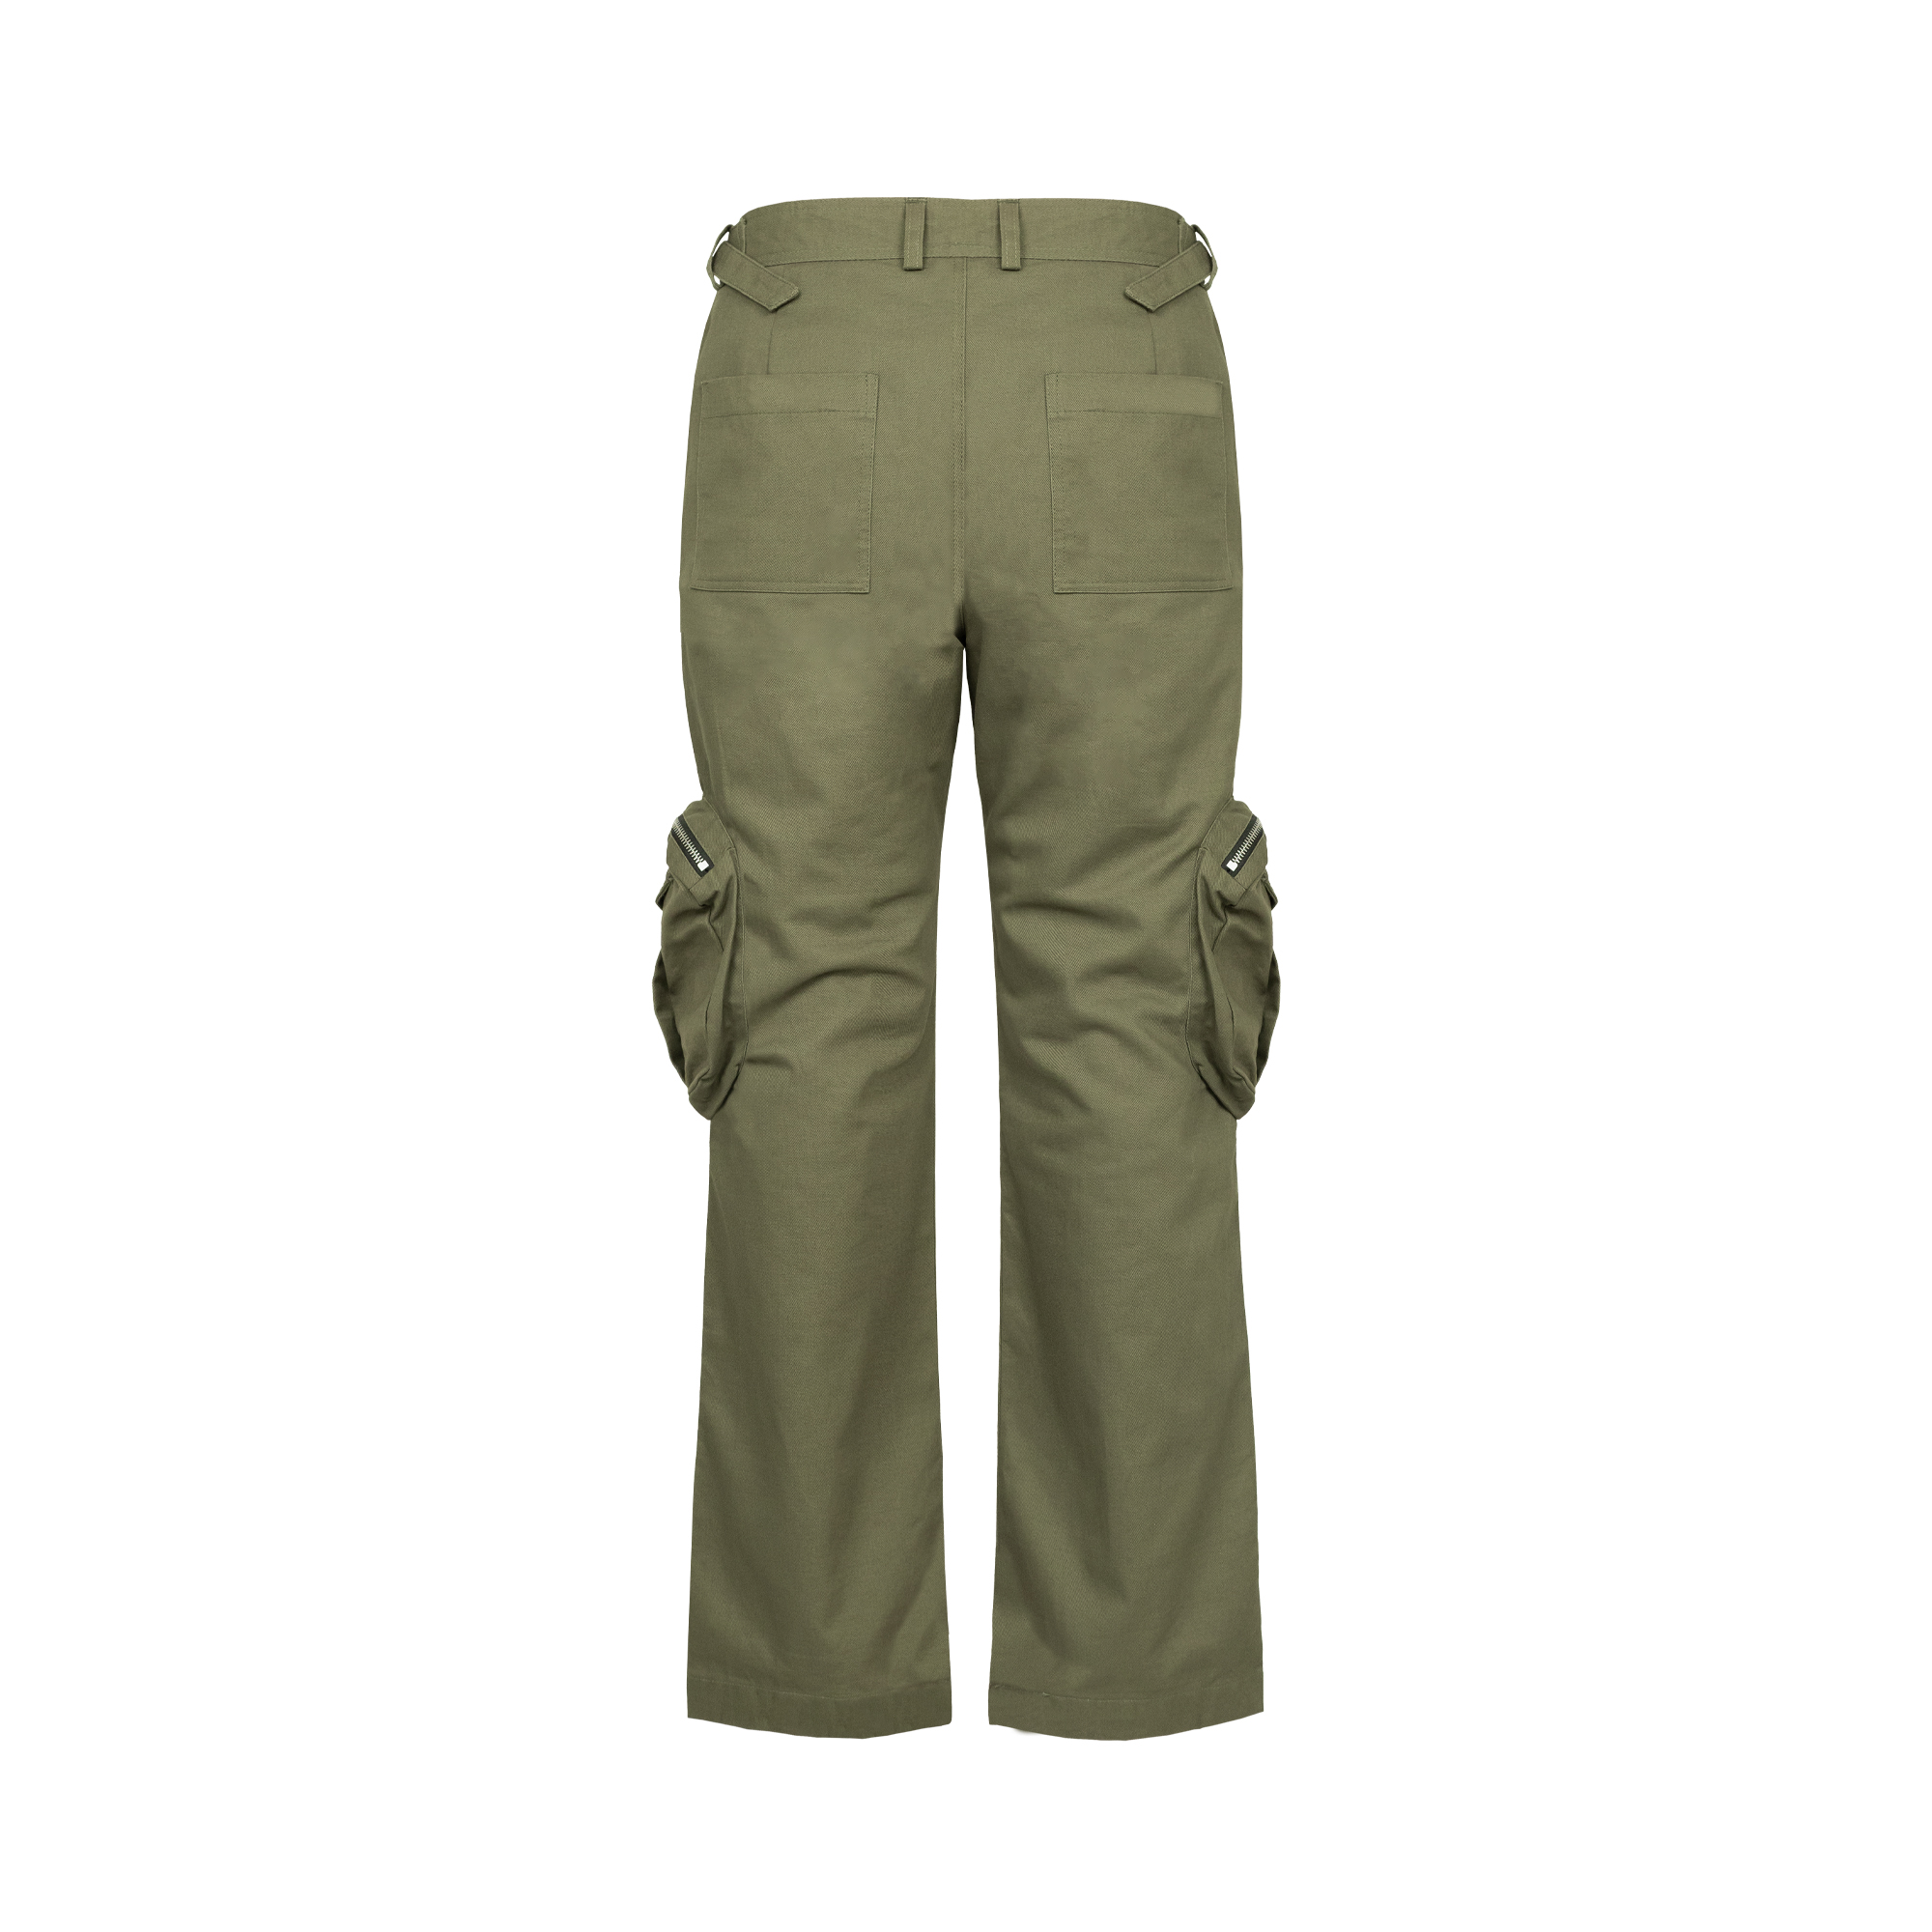 Modular Pocket Cotton Twill Cargo Pant in Olive – REESE COOPER®